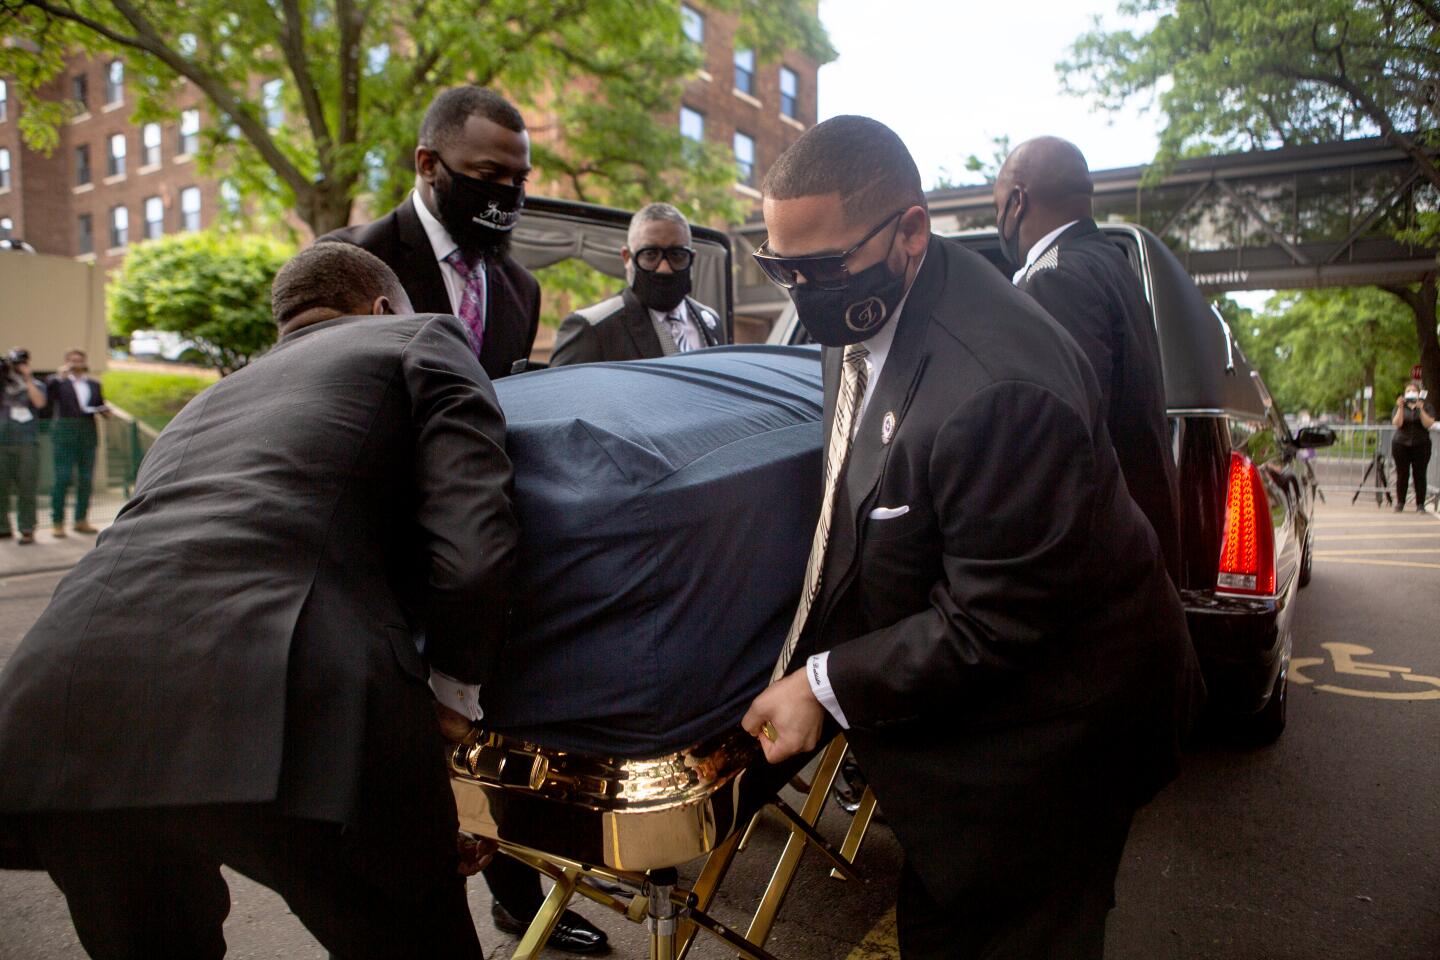 The casket of George Floyd arrives at the memorial service.